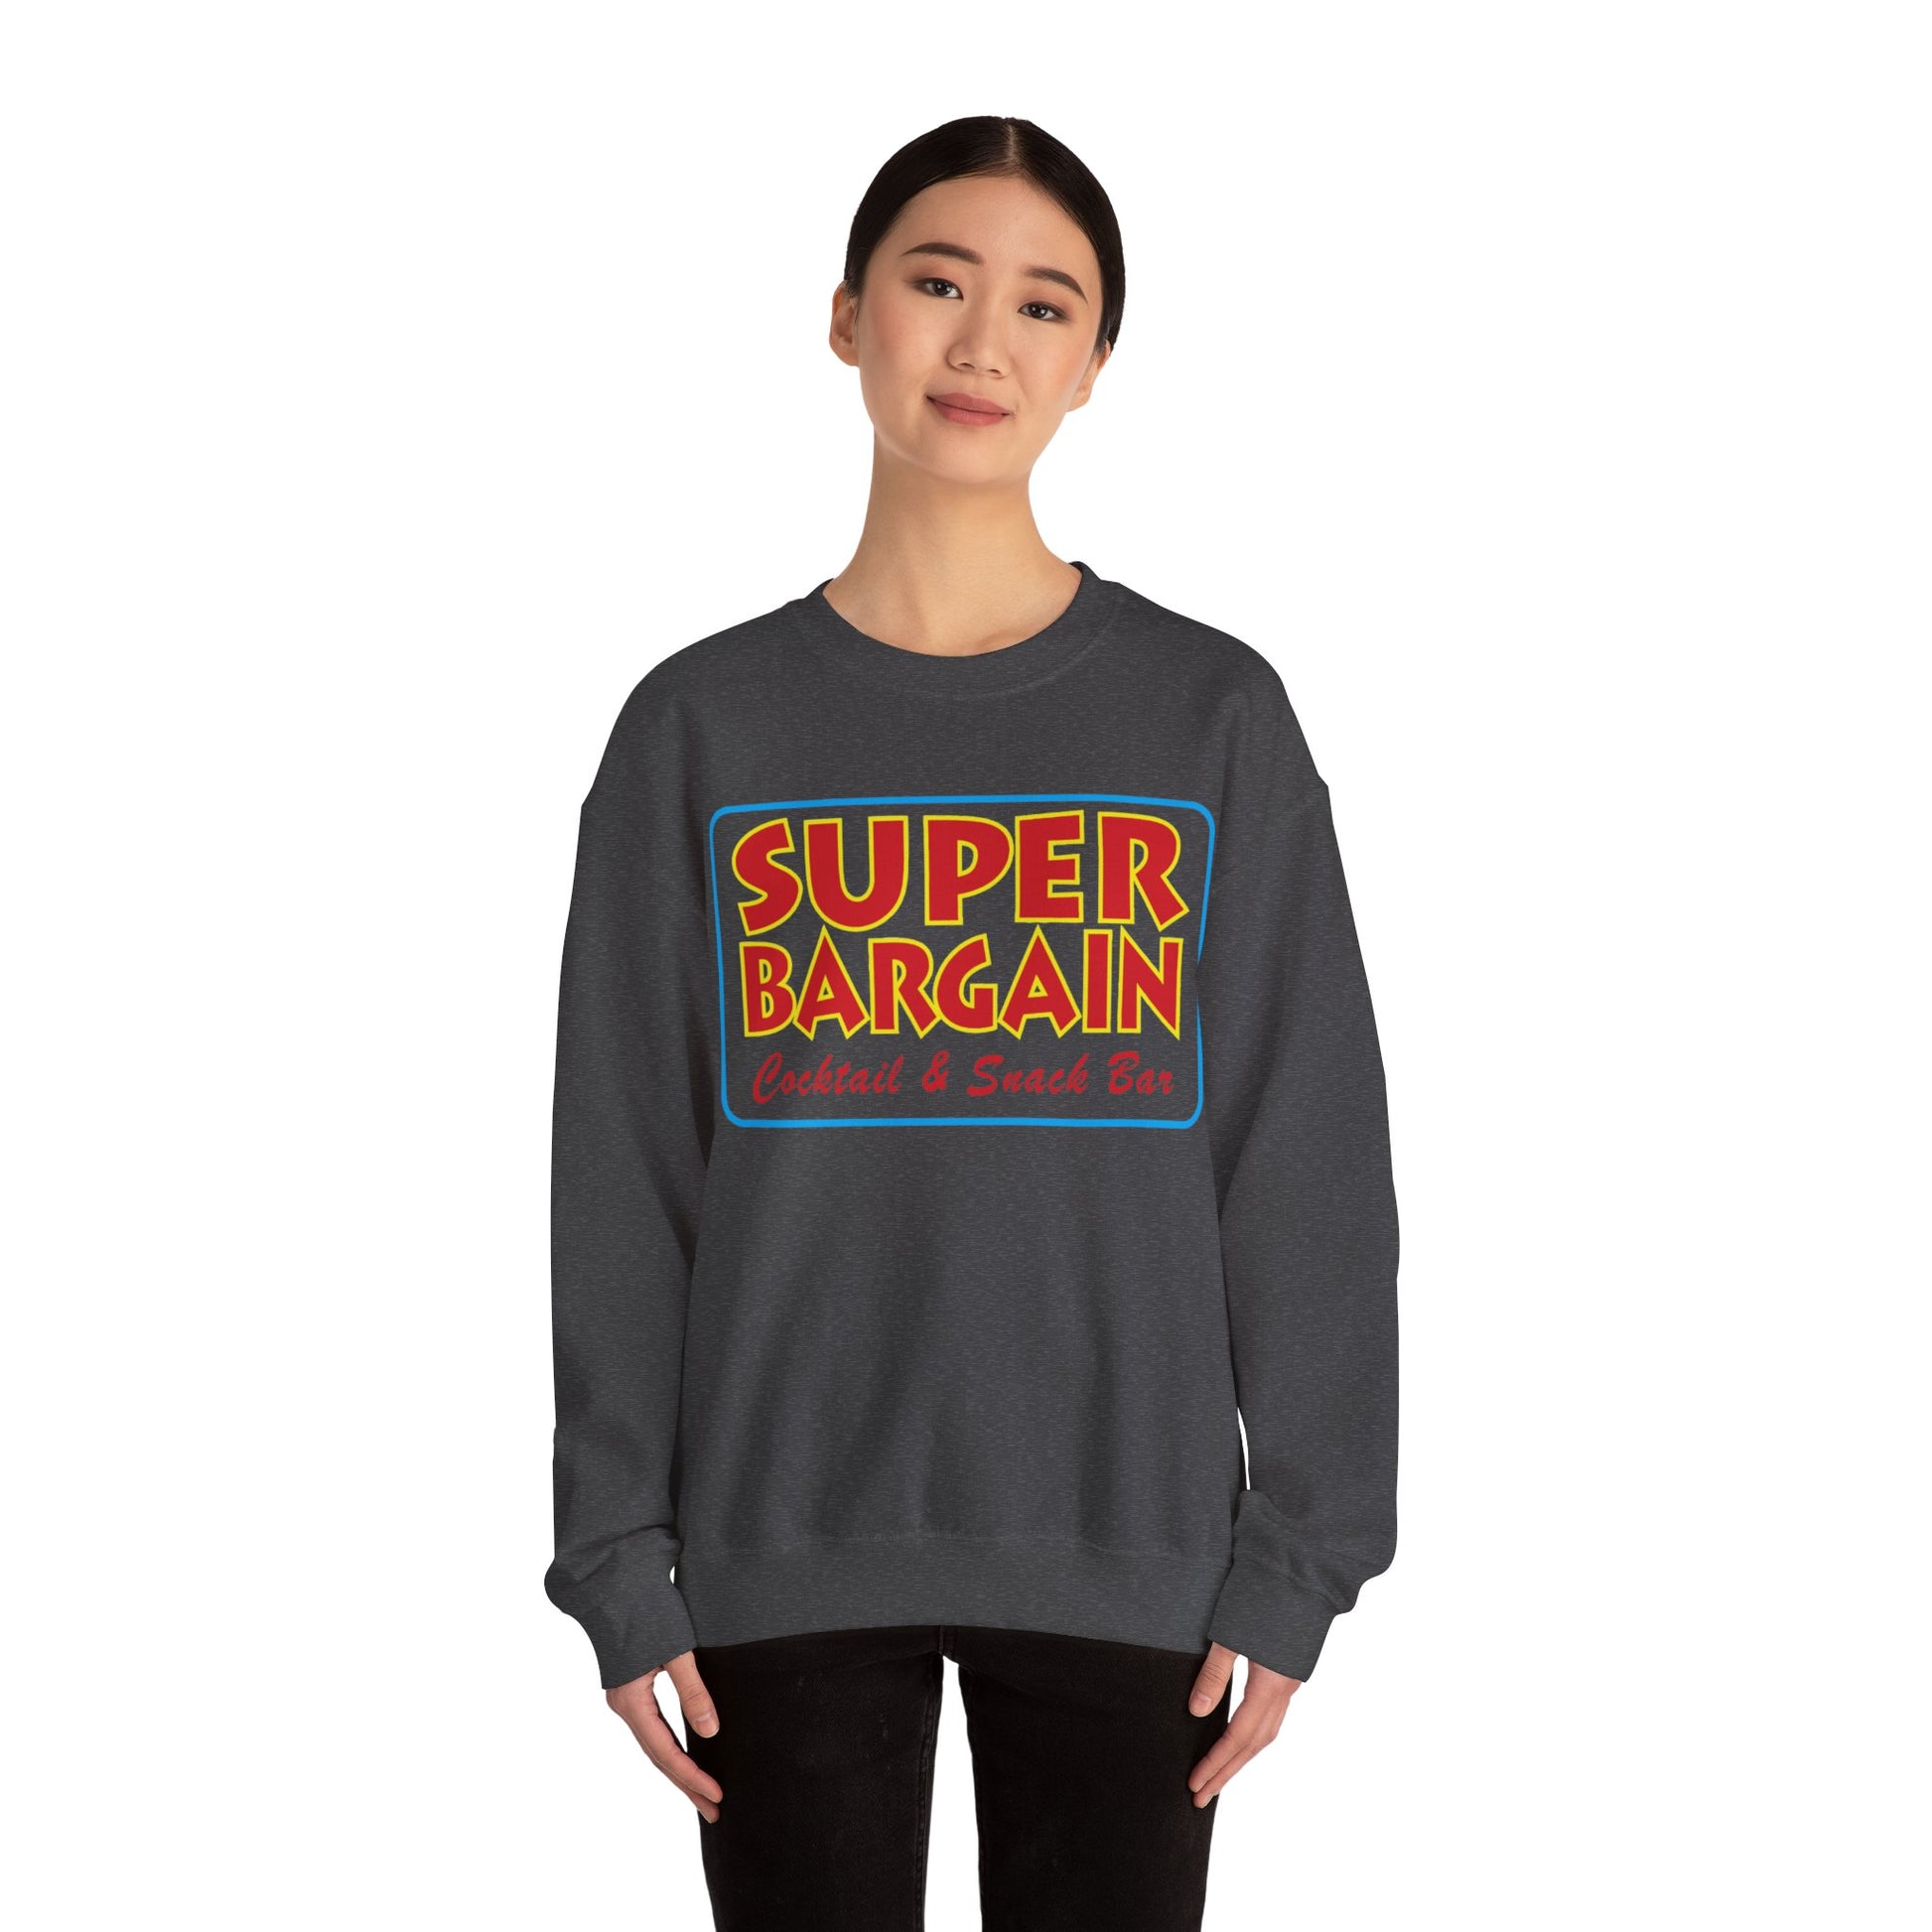 A woman models a gray Unisex Heavy Blend™ Crewneck Signature Logo Sweatshirt featuring a colorful "Toronto Super Bargain Cocktail & Snack Bar" logo on the front from Printify.